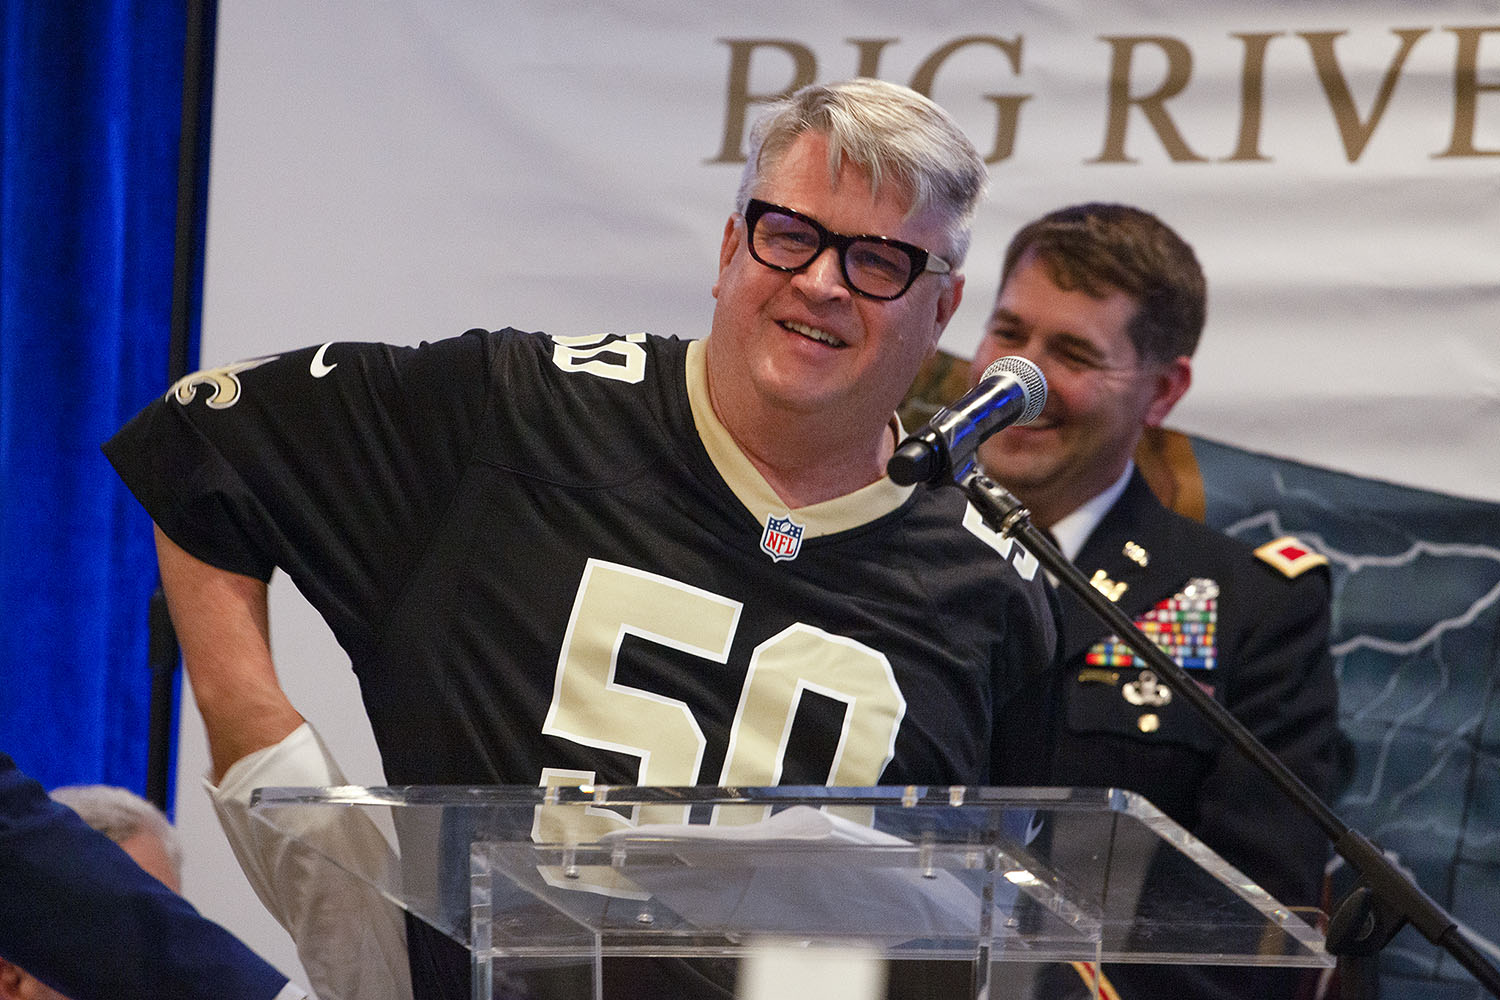 Sean Duffy, executive director of the Big River Coalition, takes off his shirt to reveal a New Orleans Saints' jersey with the number 50, signifying the newly achieved 50-foot depth for the Mississippi River Ship Channel to New Orleans. (Photo by Frank McCormack)